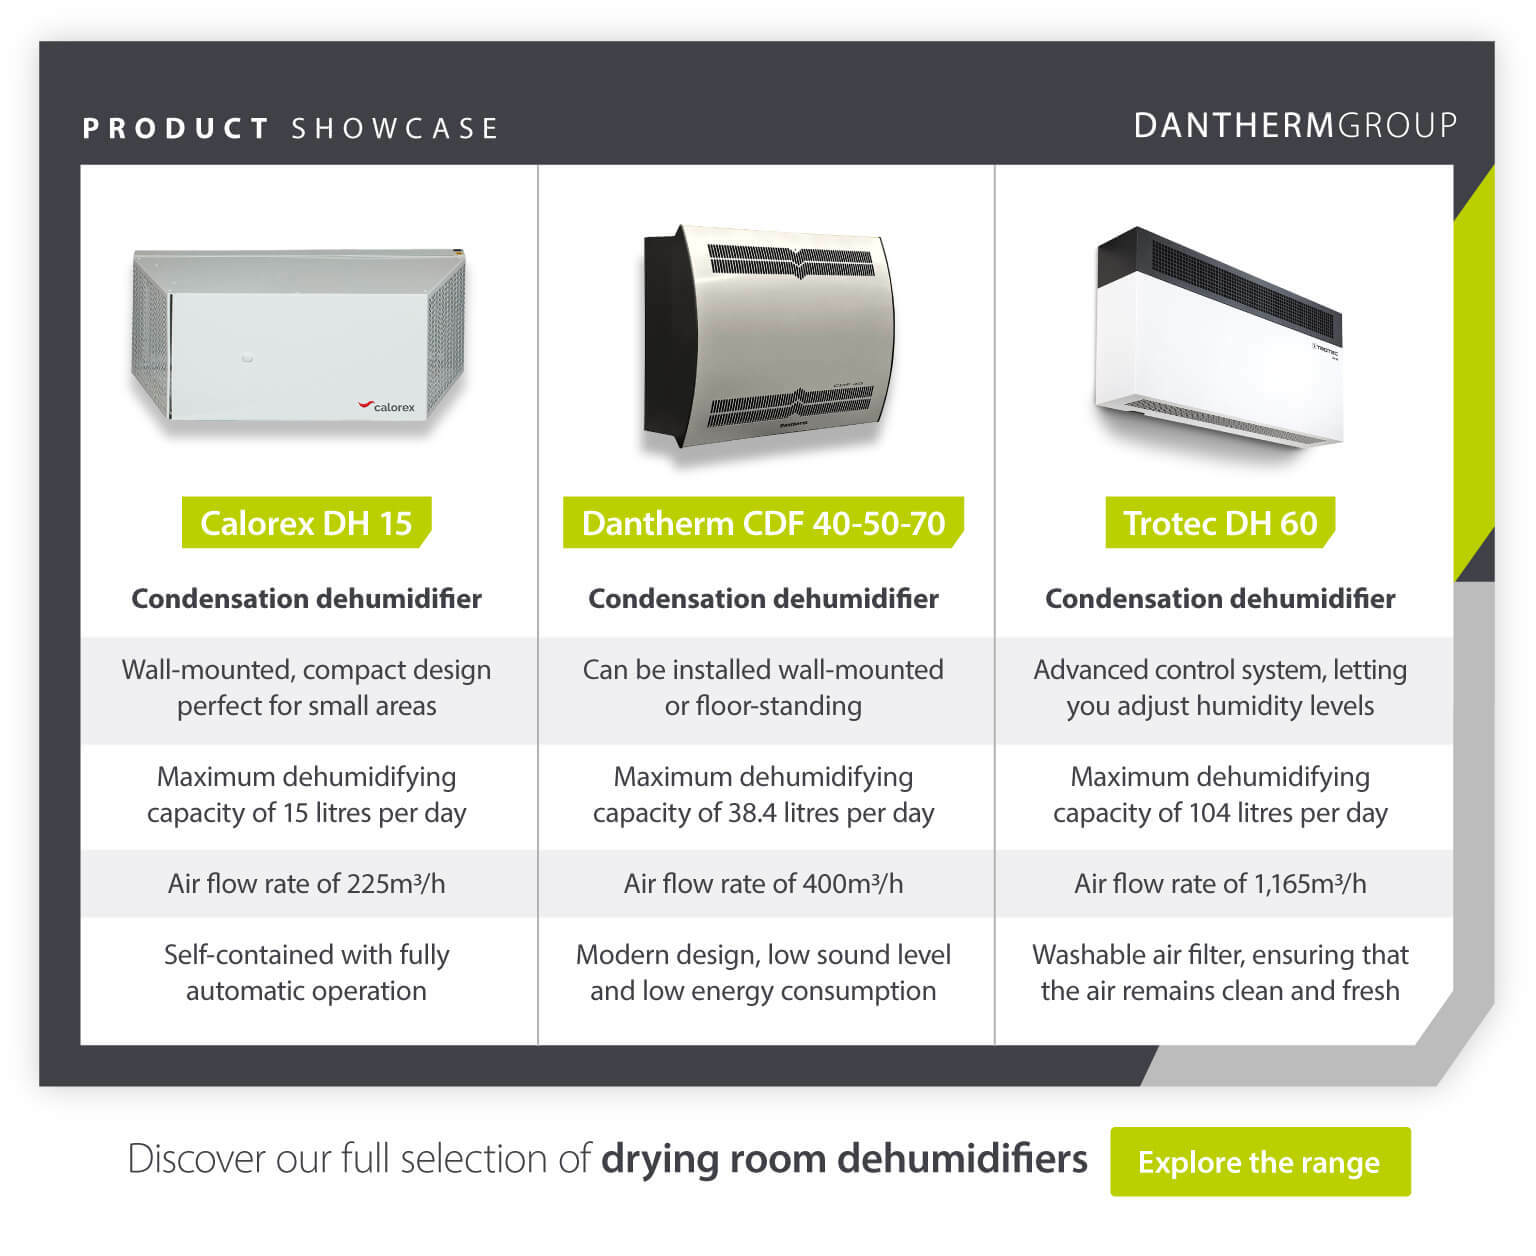 Product showcase comparing condensation dehumidifiers for drying rooms